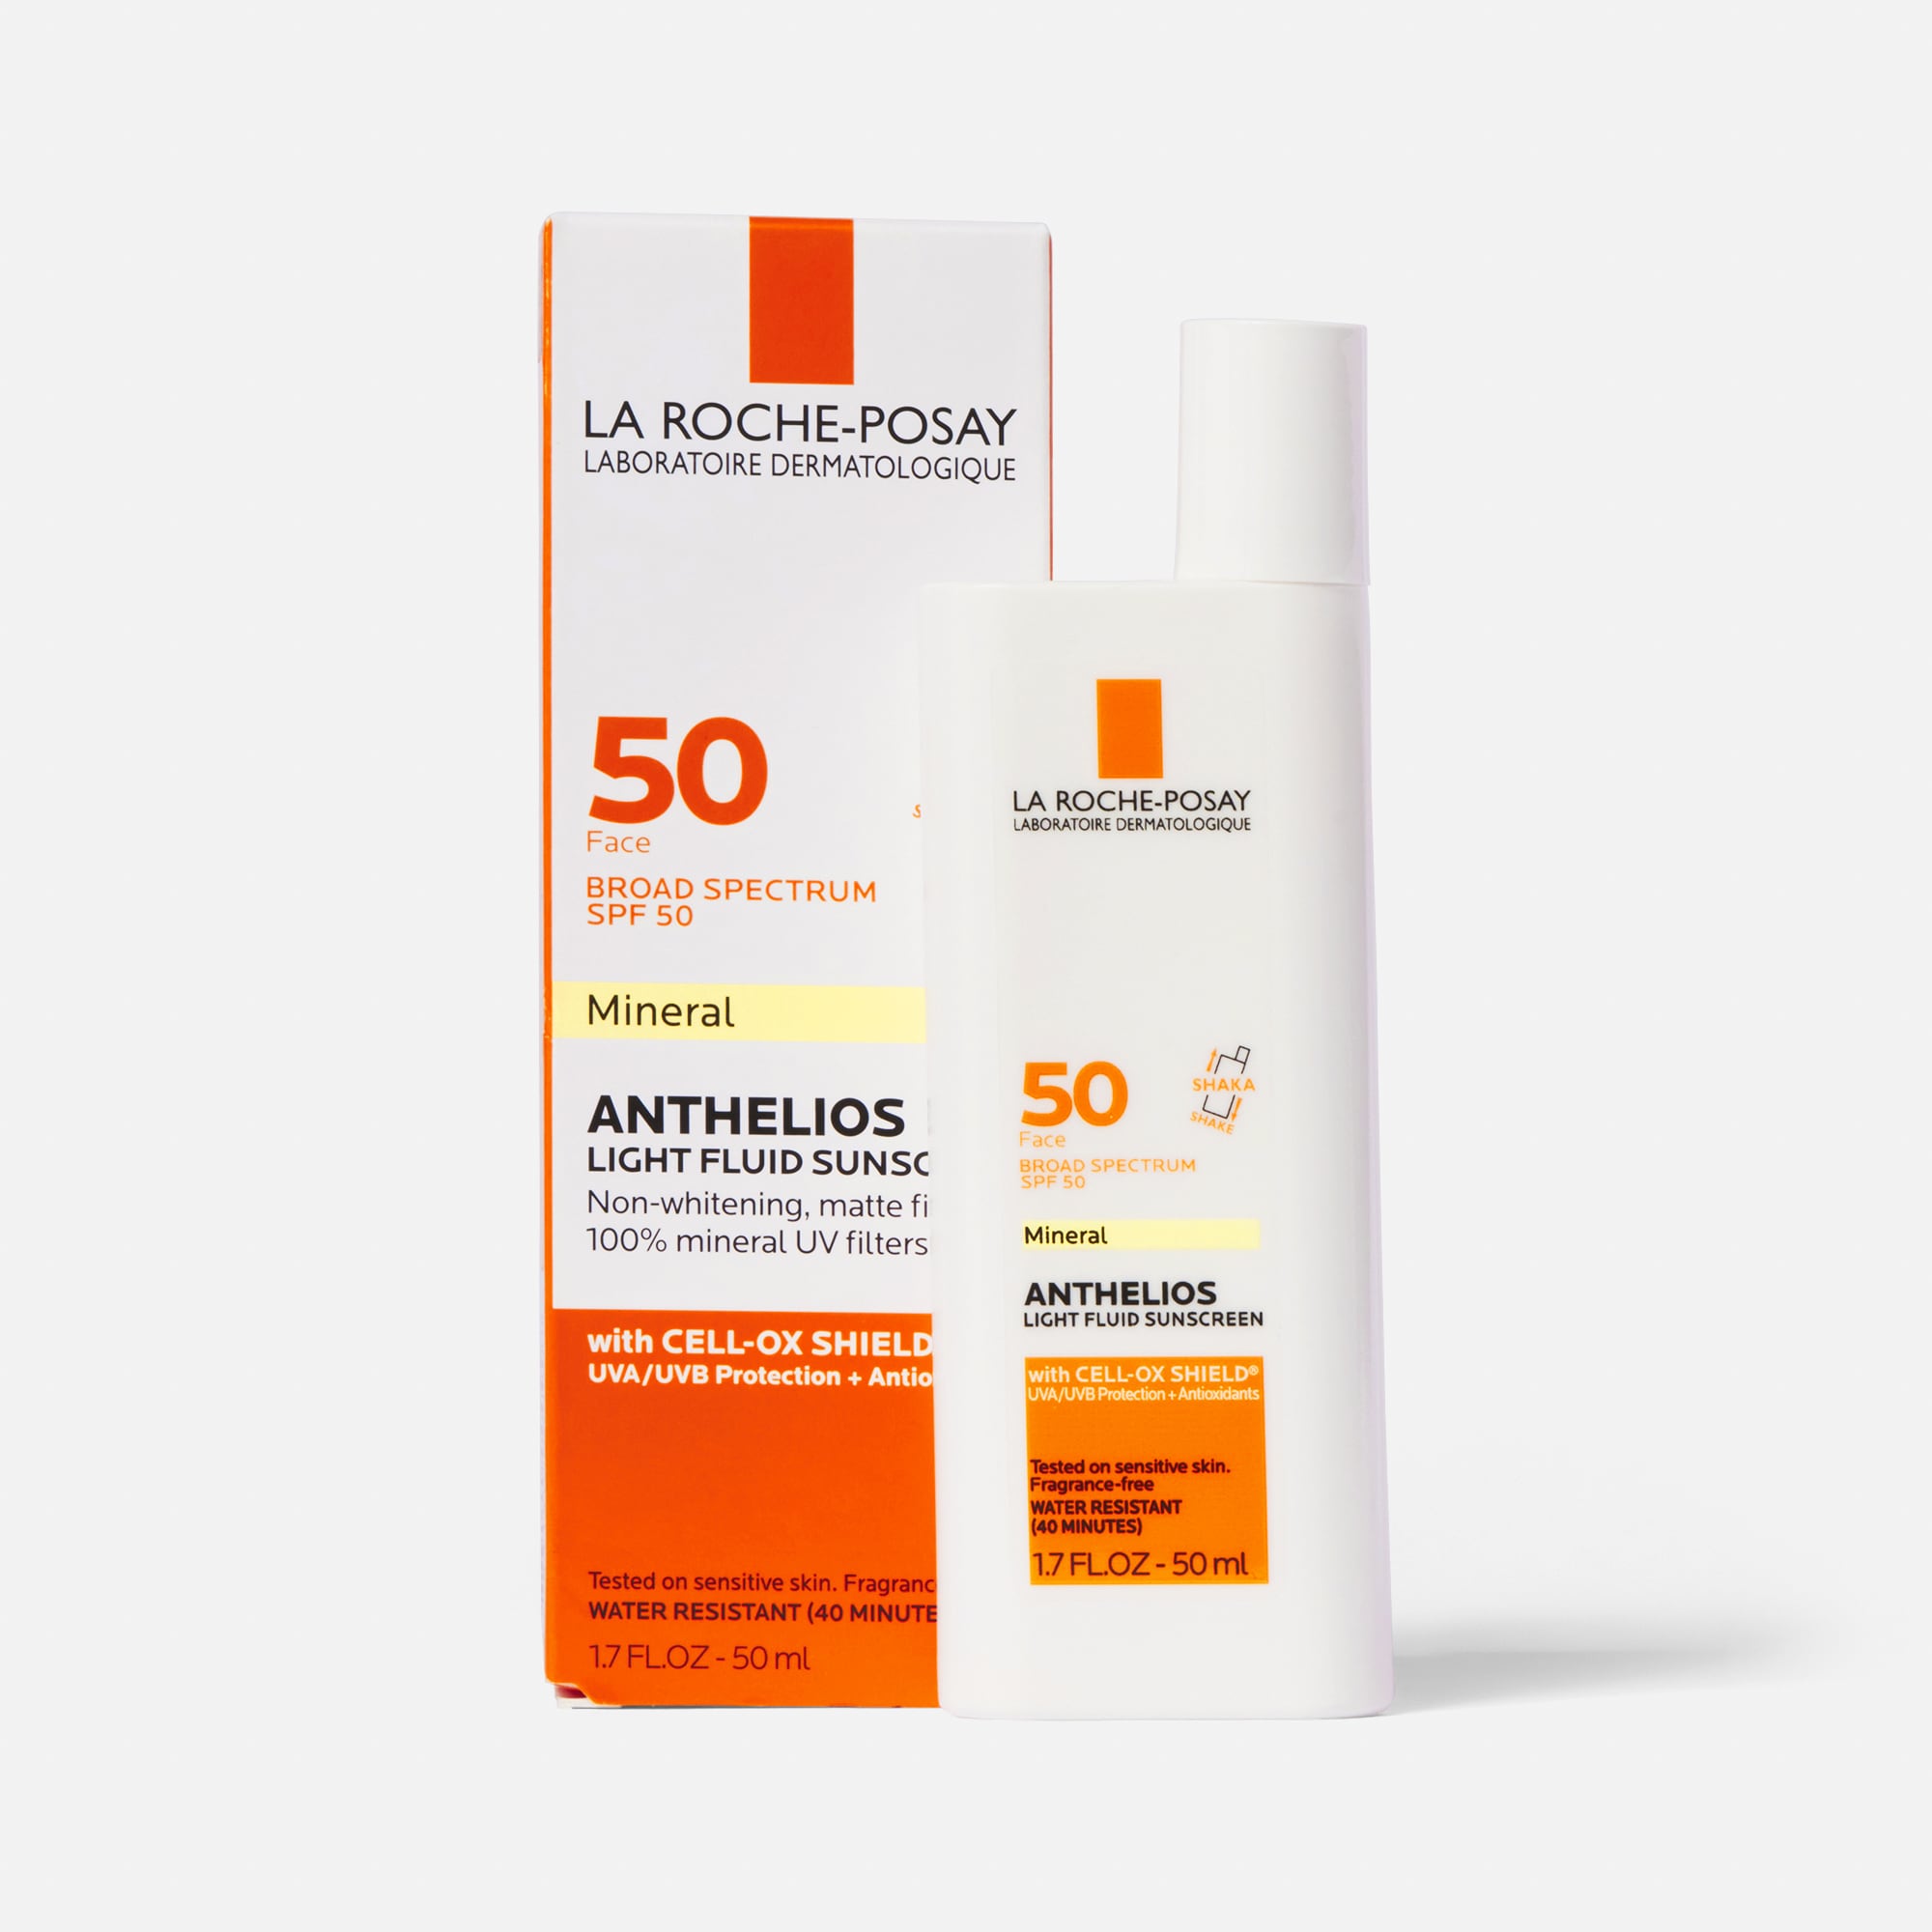 La Roche-Posay Anthelios 50 Mineral Sunscreen Ultra-Light Fluid for Face, SPF  50 with Zinc Oxide and Antioxidants, 1.7 fl oz.